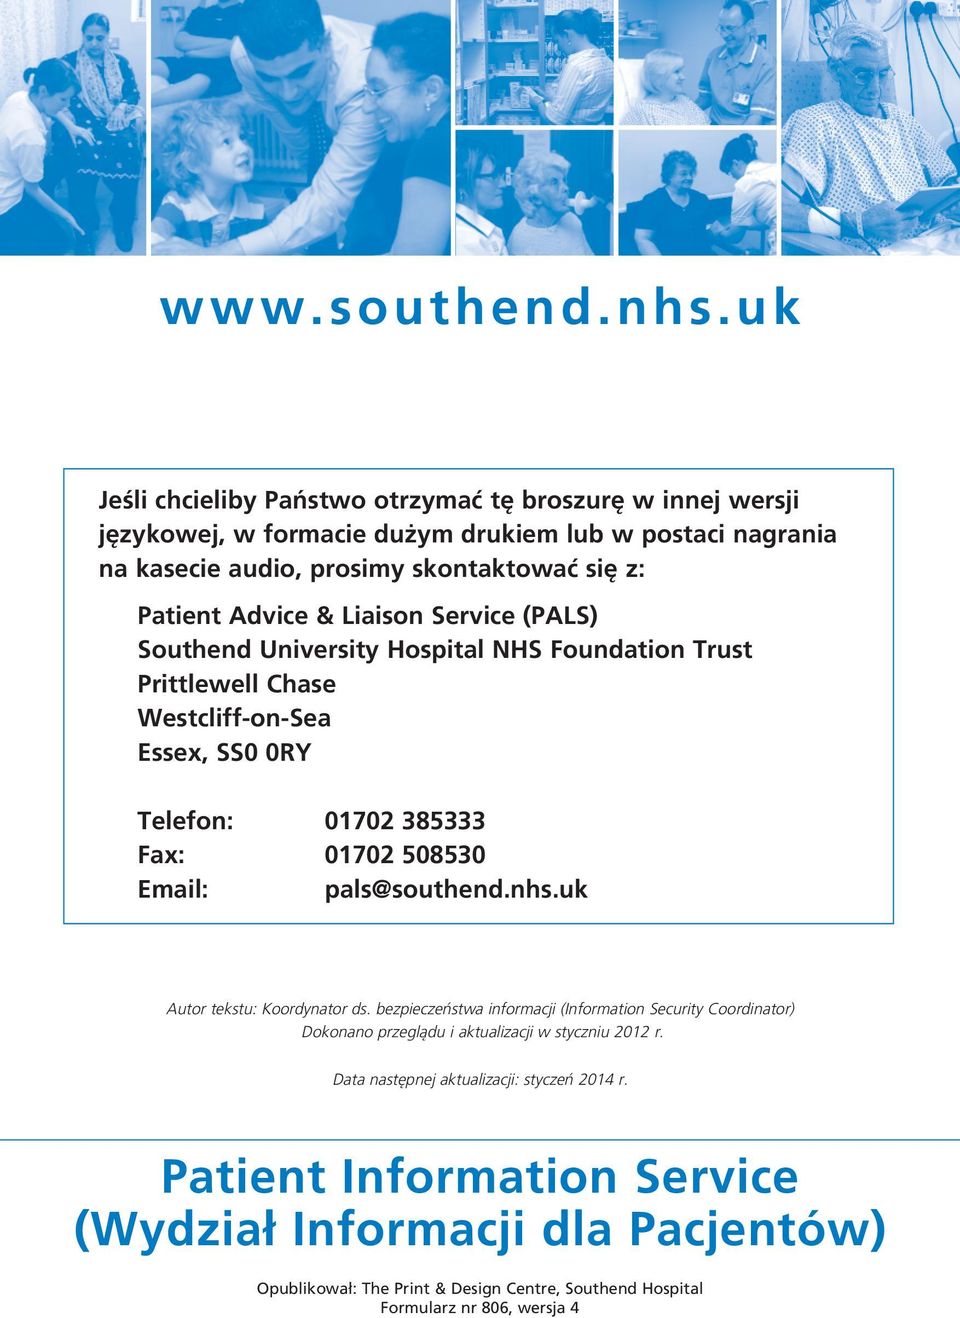 & Liaison Service (PALS) Southend University Hospital NHS Foundation Trust Prittlewell Chase Westcliff on Sea Essex, SS0 0RY Telefon: 01702 385333 Fax: 01702 508530 Email: